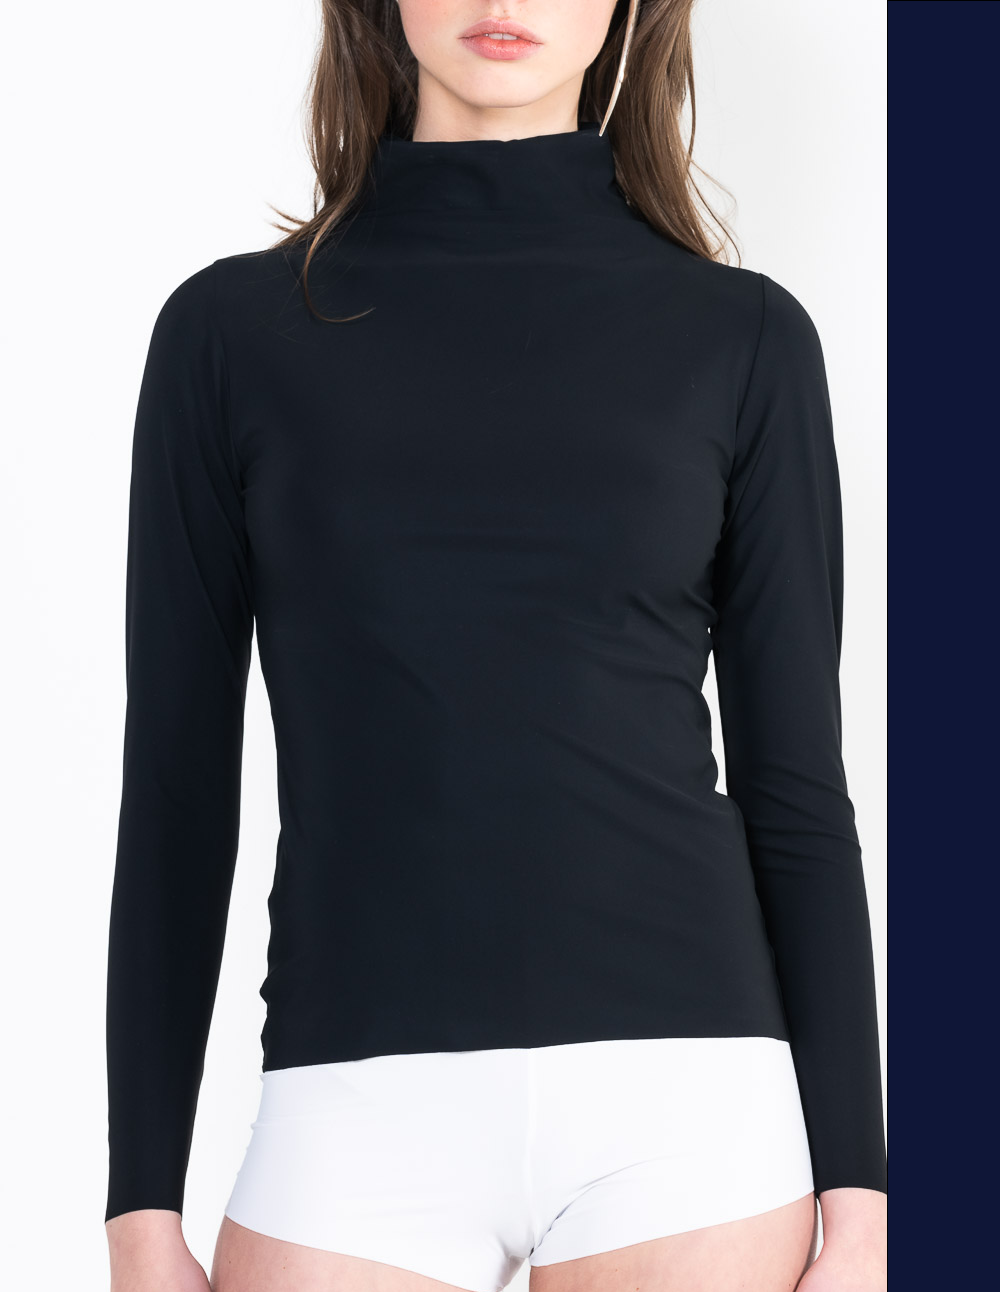 L13 High neck top with long sleeves